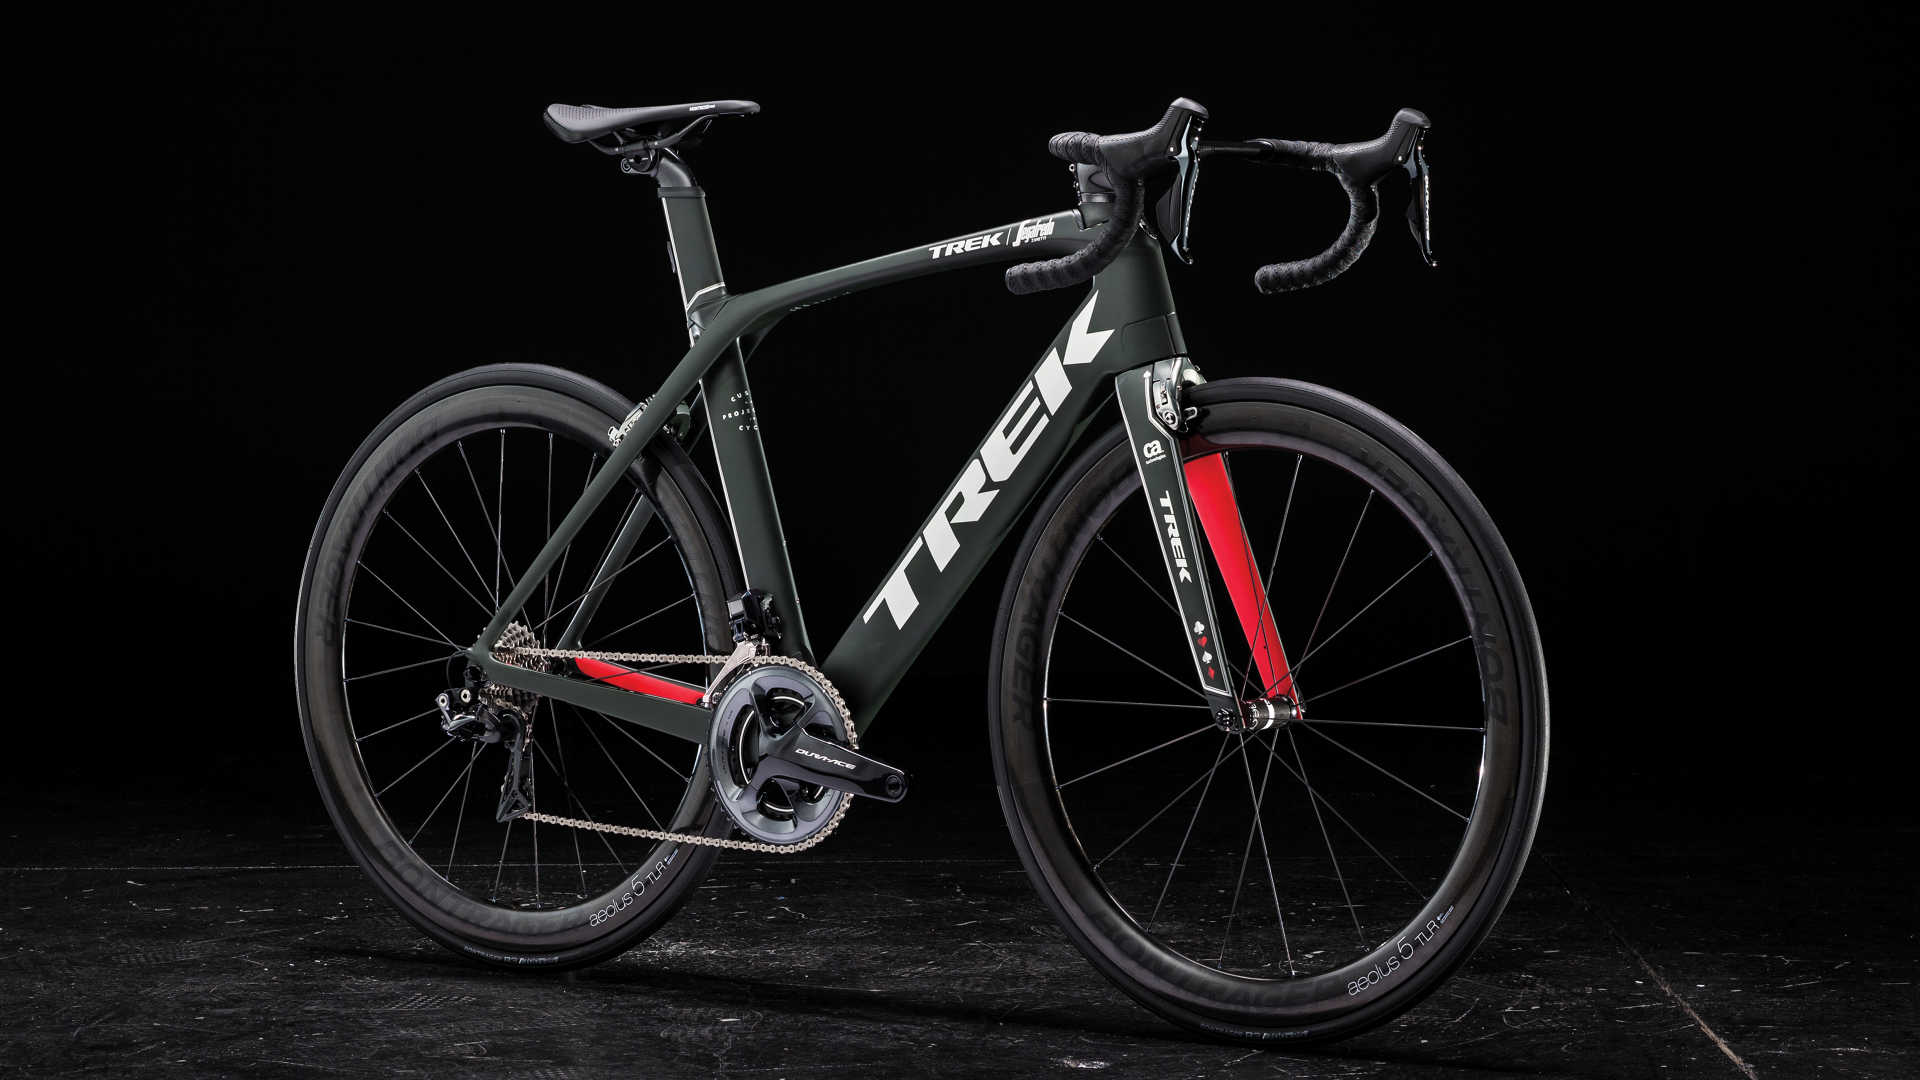 Degenkolb and Trek Project One get Limited Edition Chasin' Aces Madone paint scheme